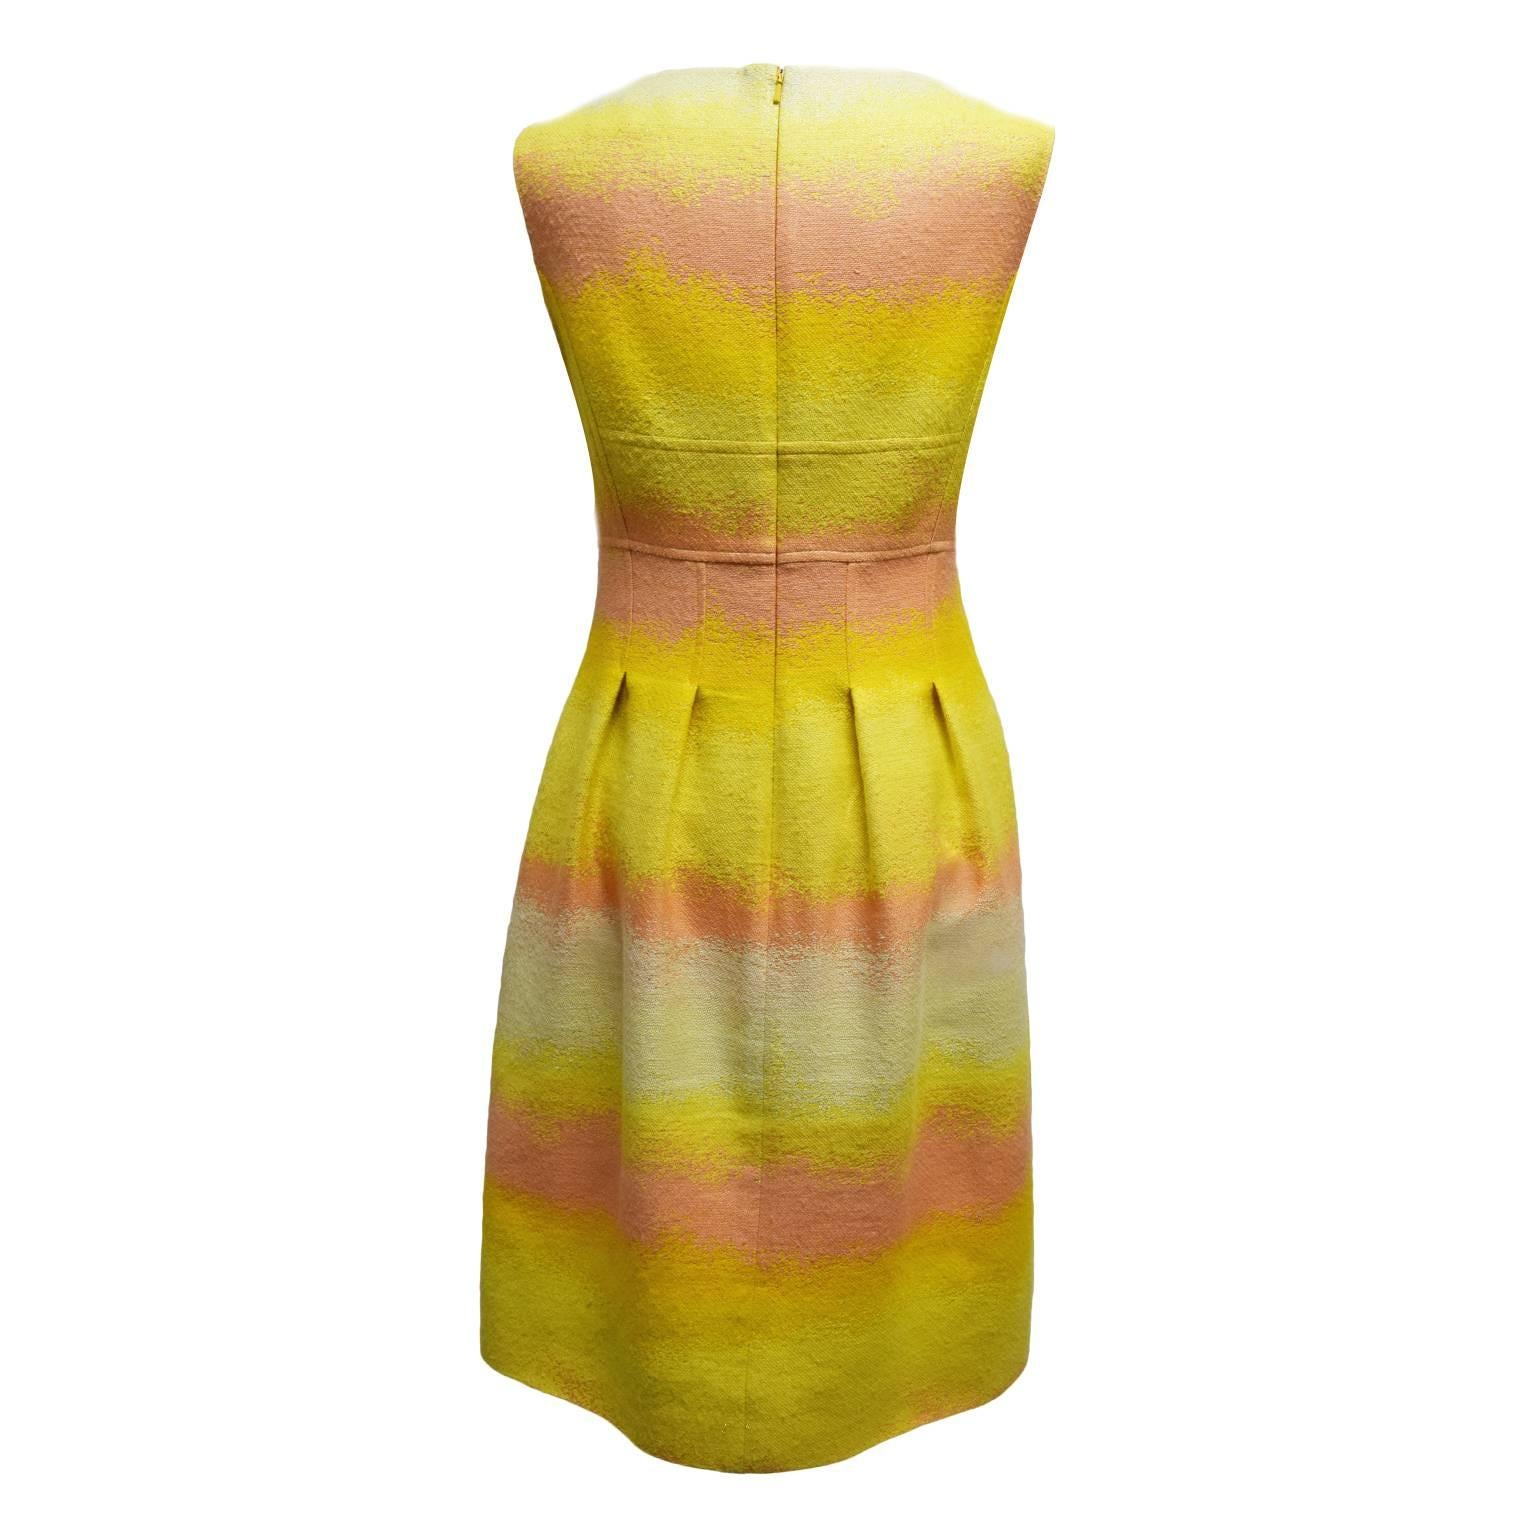 This dress by Lela Rose is a great summer dress. Made of wool the dress has a yellow and coral ombre print, and is fully lined. The back is a zipped back, while the skirt has knife pleats and the neckline is a deep-v. 